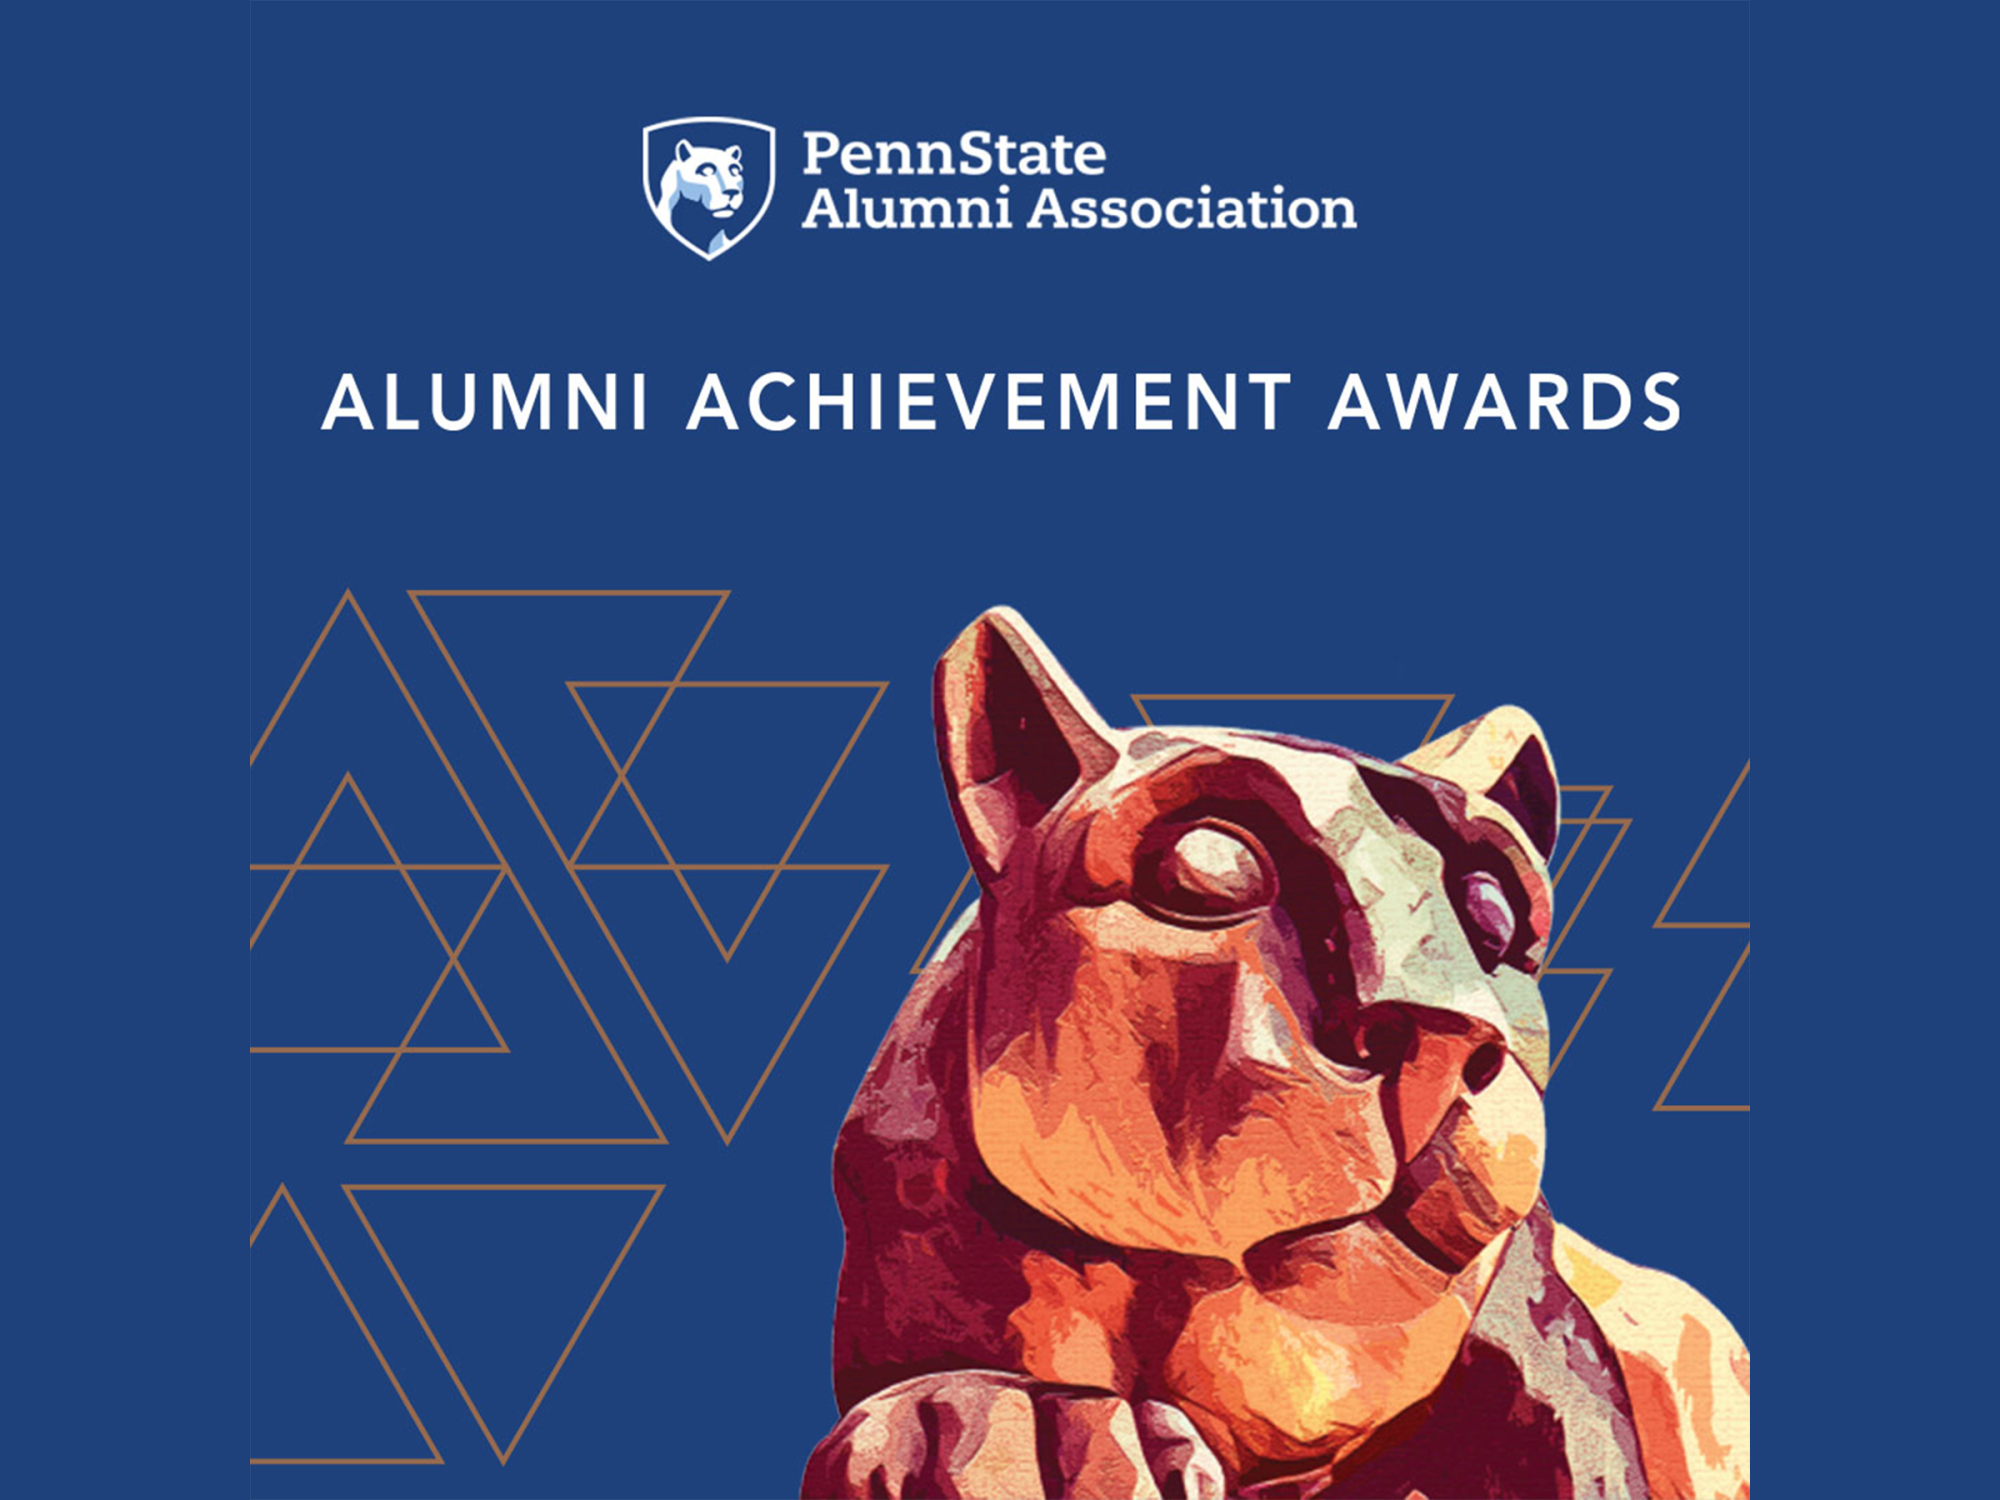 11 prominent young Penn Staters to be honored with Alumni Achievement Award